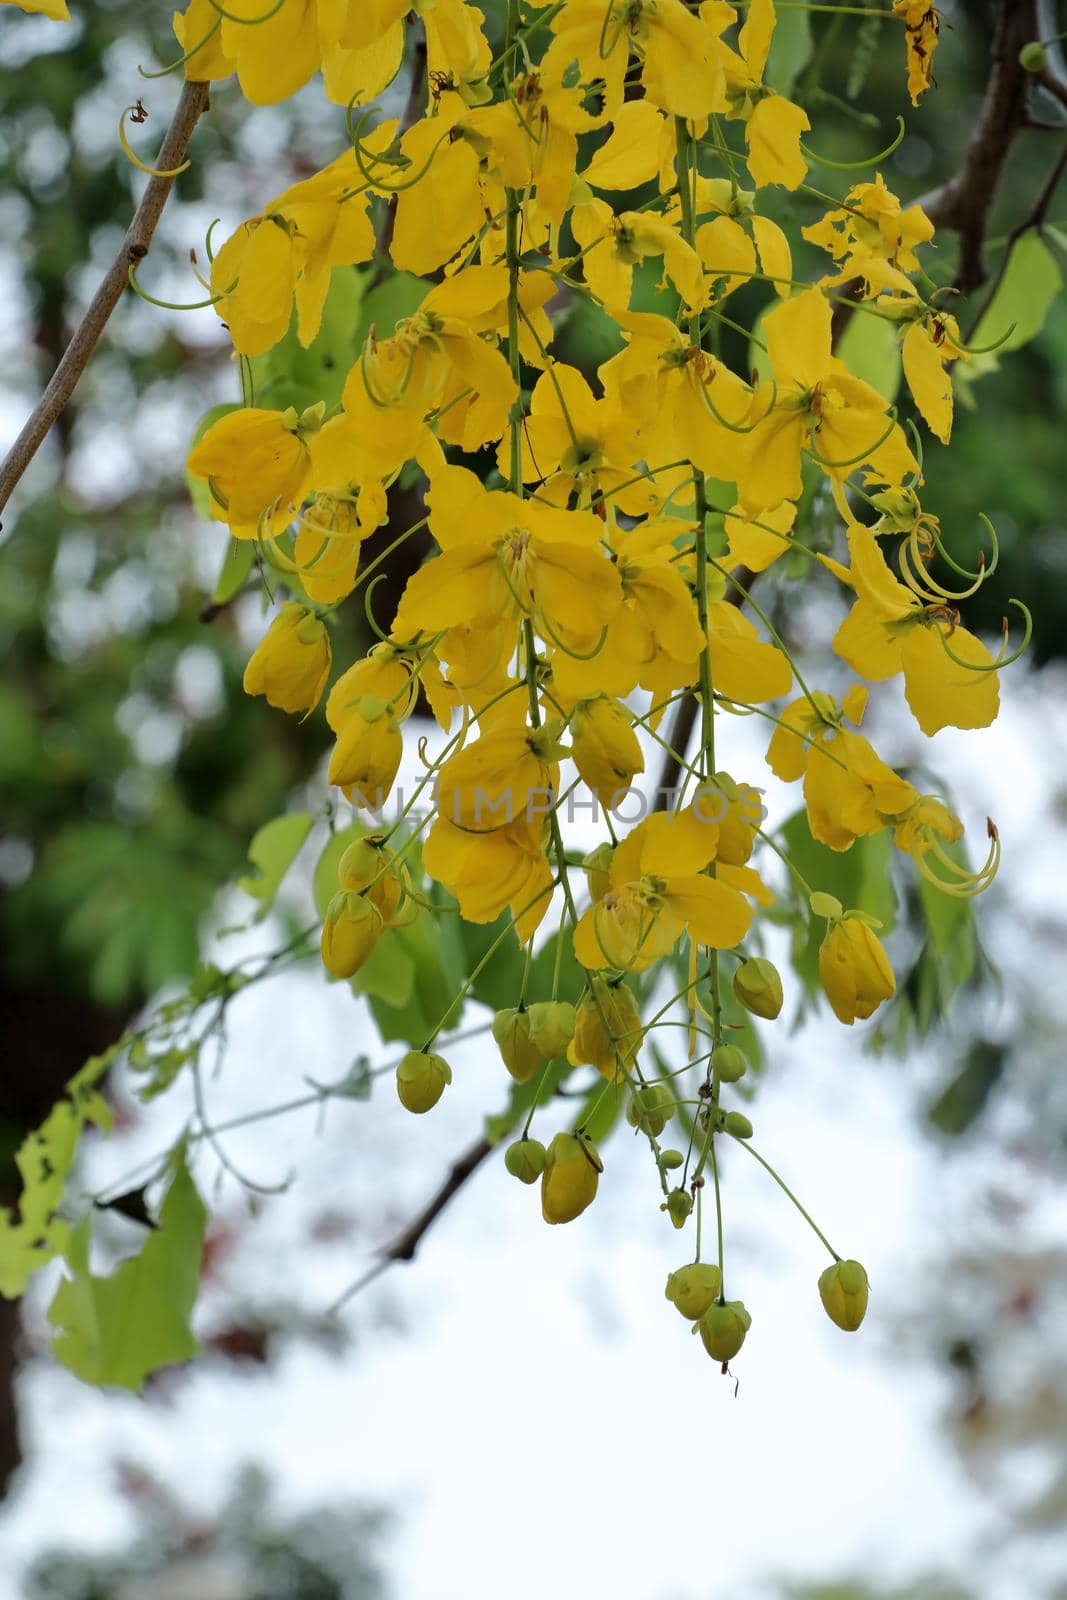 Ratchaphruek flower or Cassia fistula is a tree of Thailand because it is a tree in every region of the country.
and has many medicinal benefits